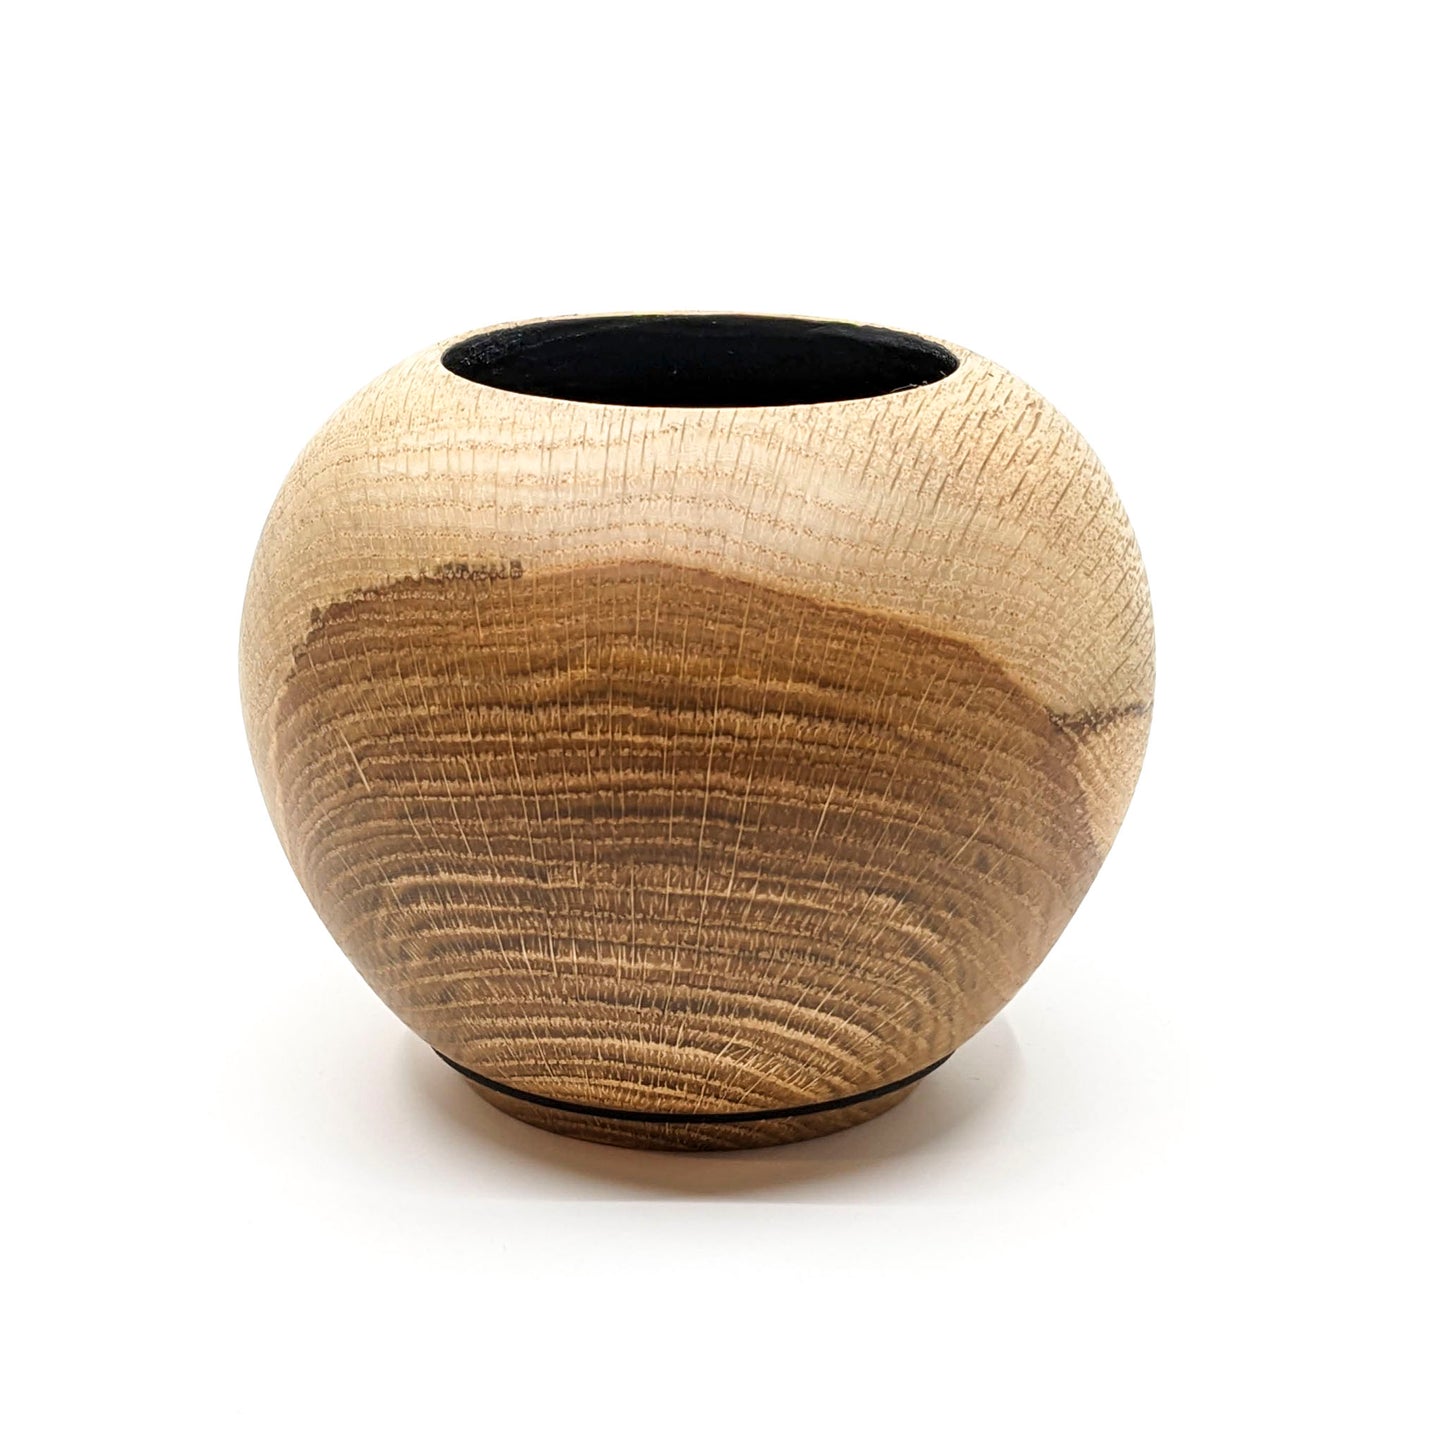 Oak Vessel with Black Stained Interior